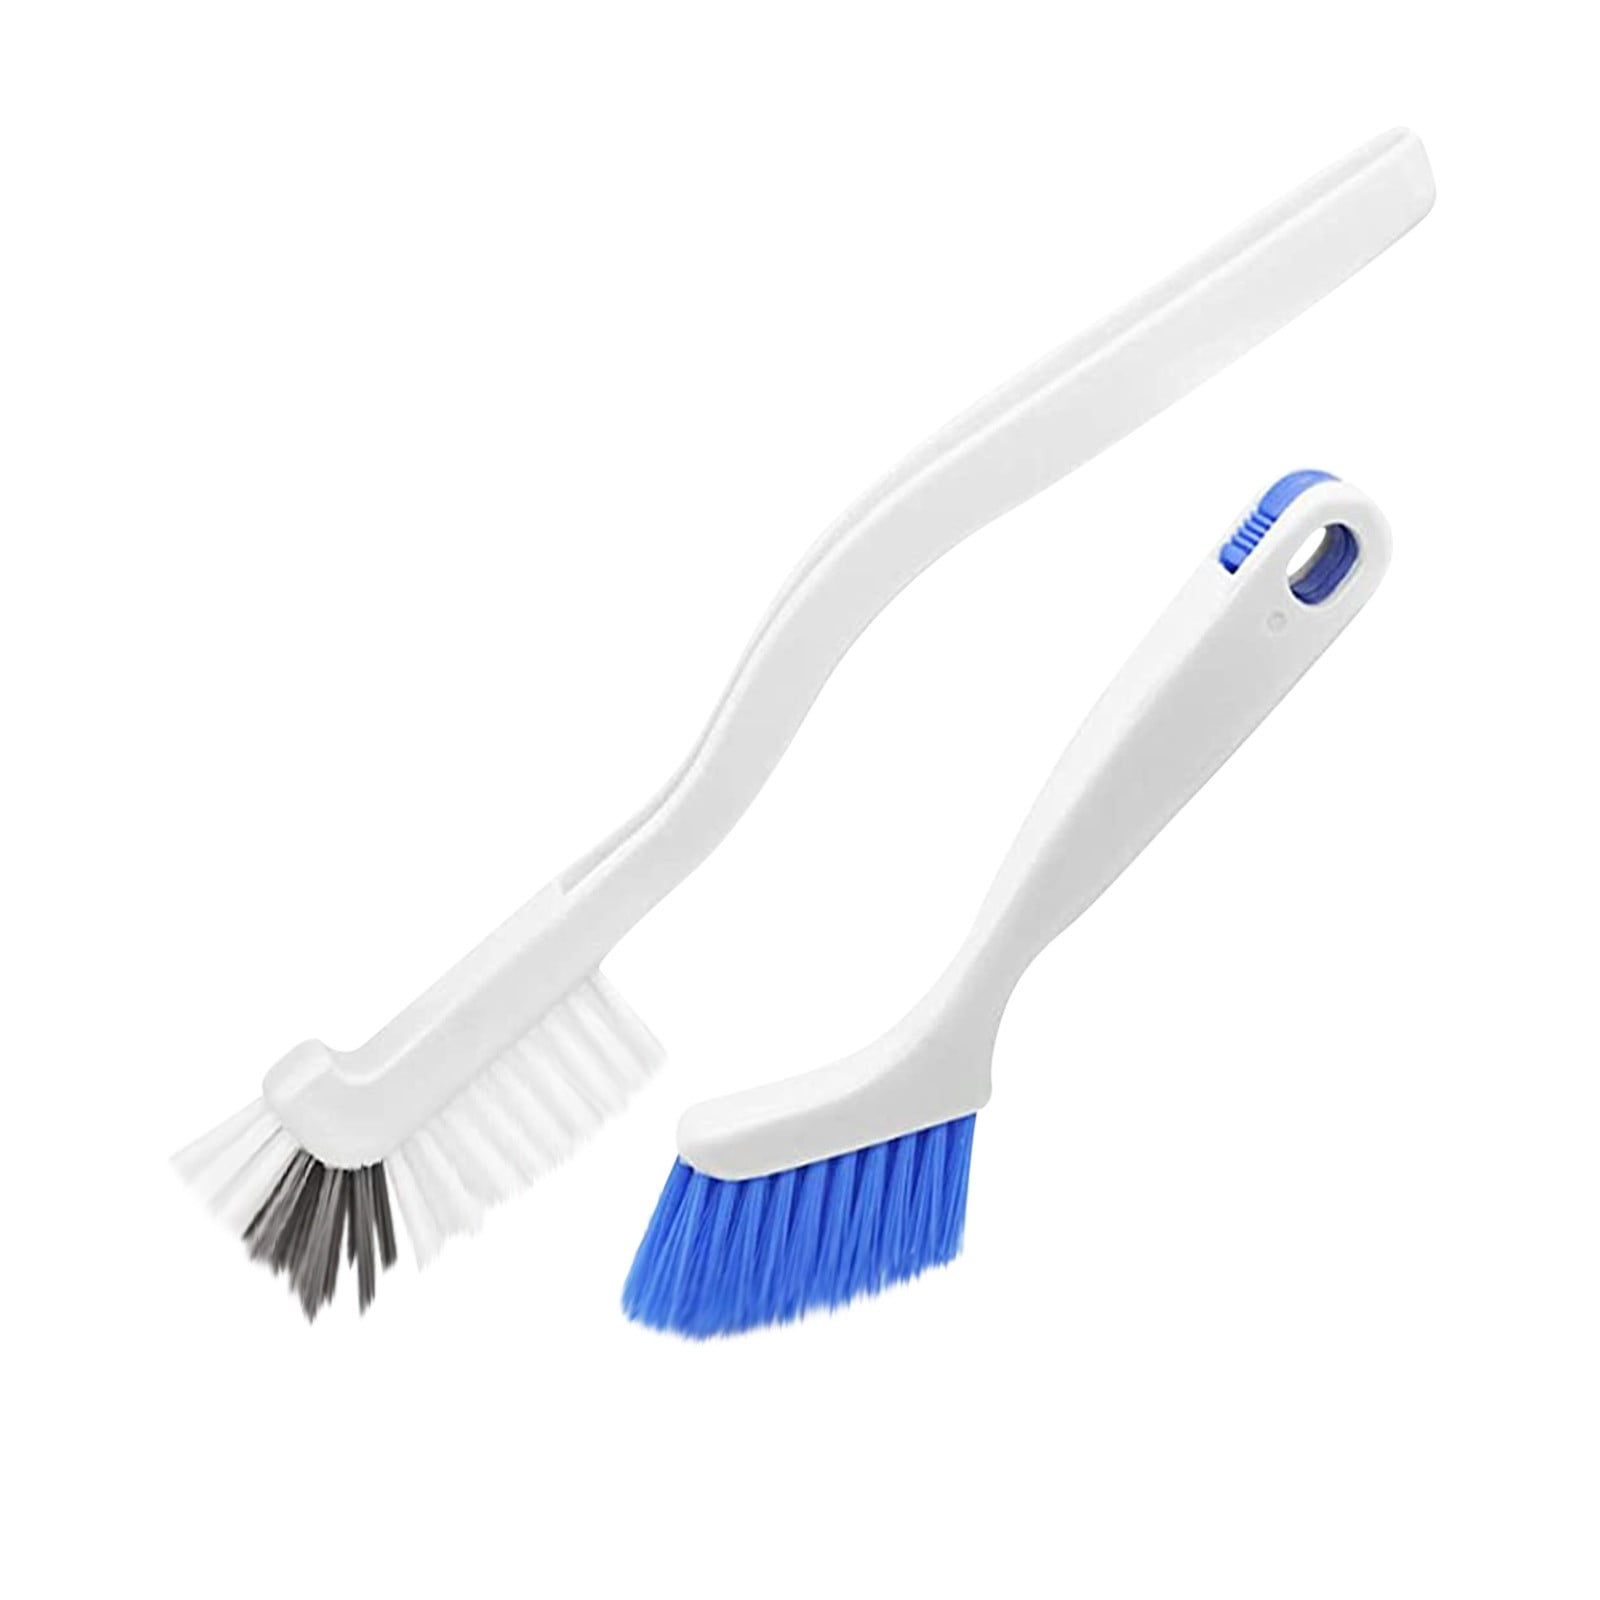 Crevice Cleaning Brush,Hard-Bristled Crevice Scrub Brush for Bathroom -  Household Cleaning Supplies for Sliding Track, Keyboard, Window, Door Ezoh  